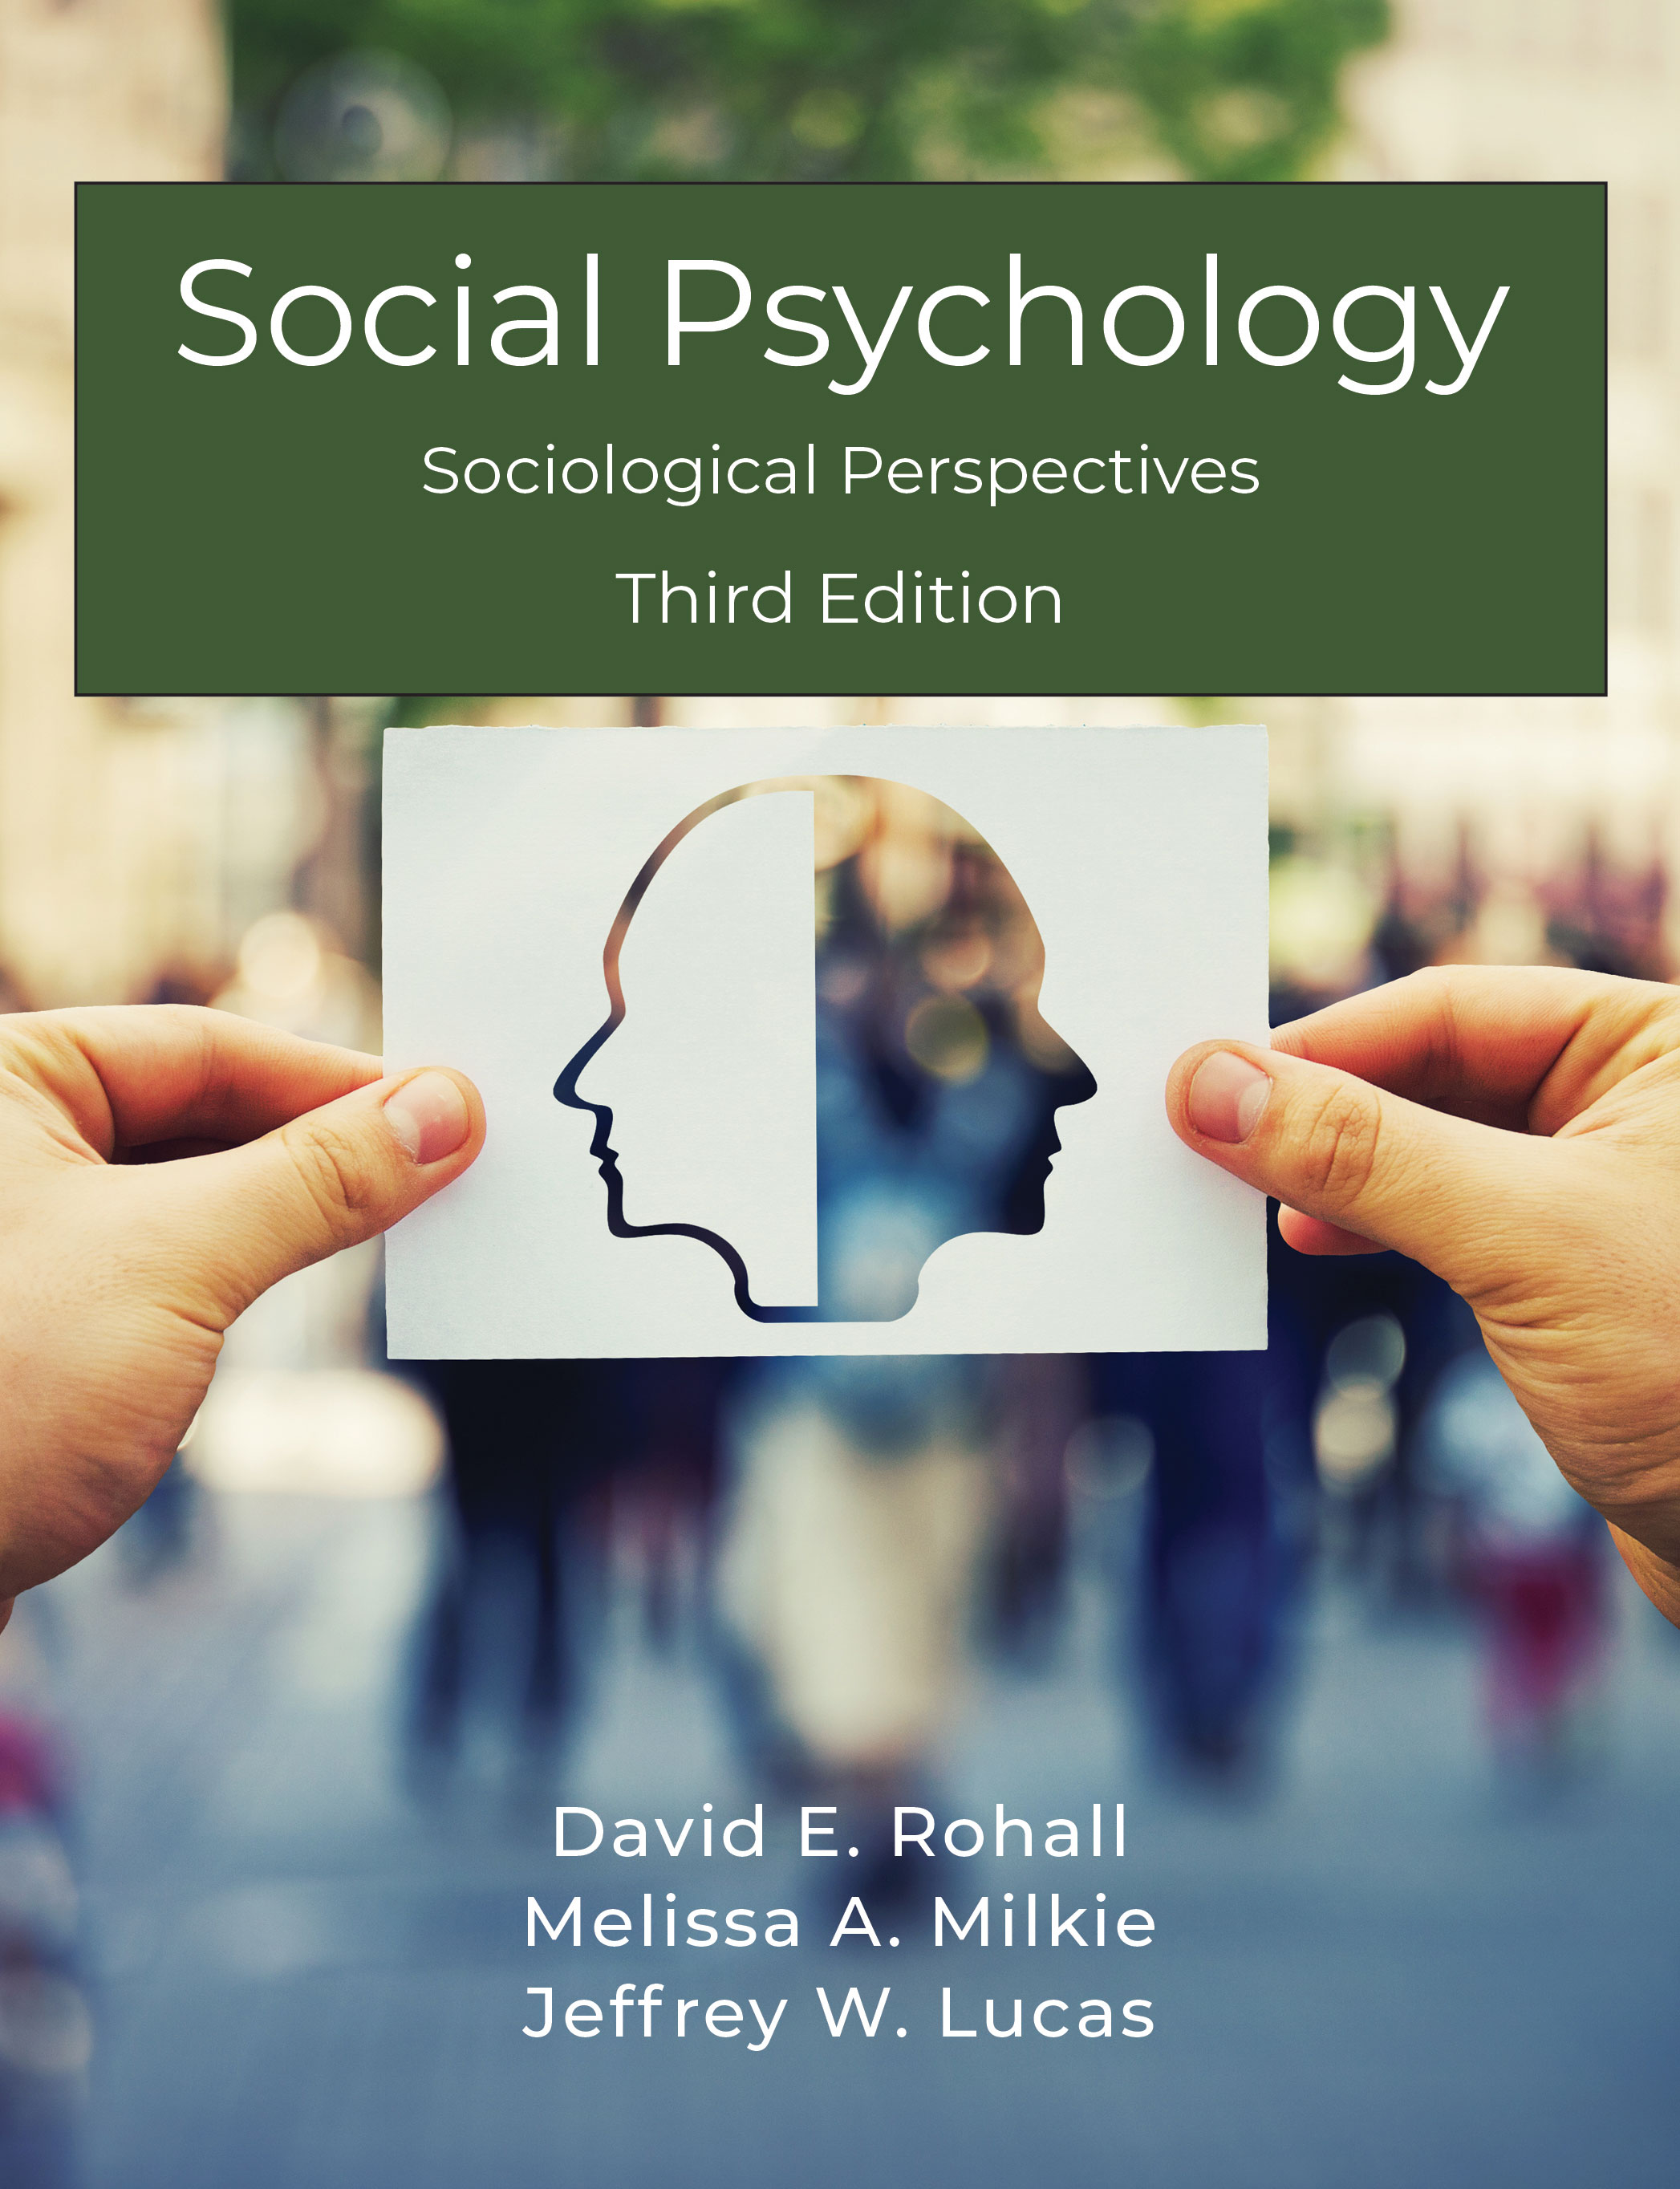 Social Psychology: Sociological Perspectives, Third Edition by David E. Rohall, Melissa A. Milkie, Jeffrey W. Lucas